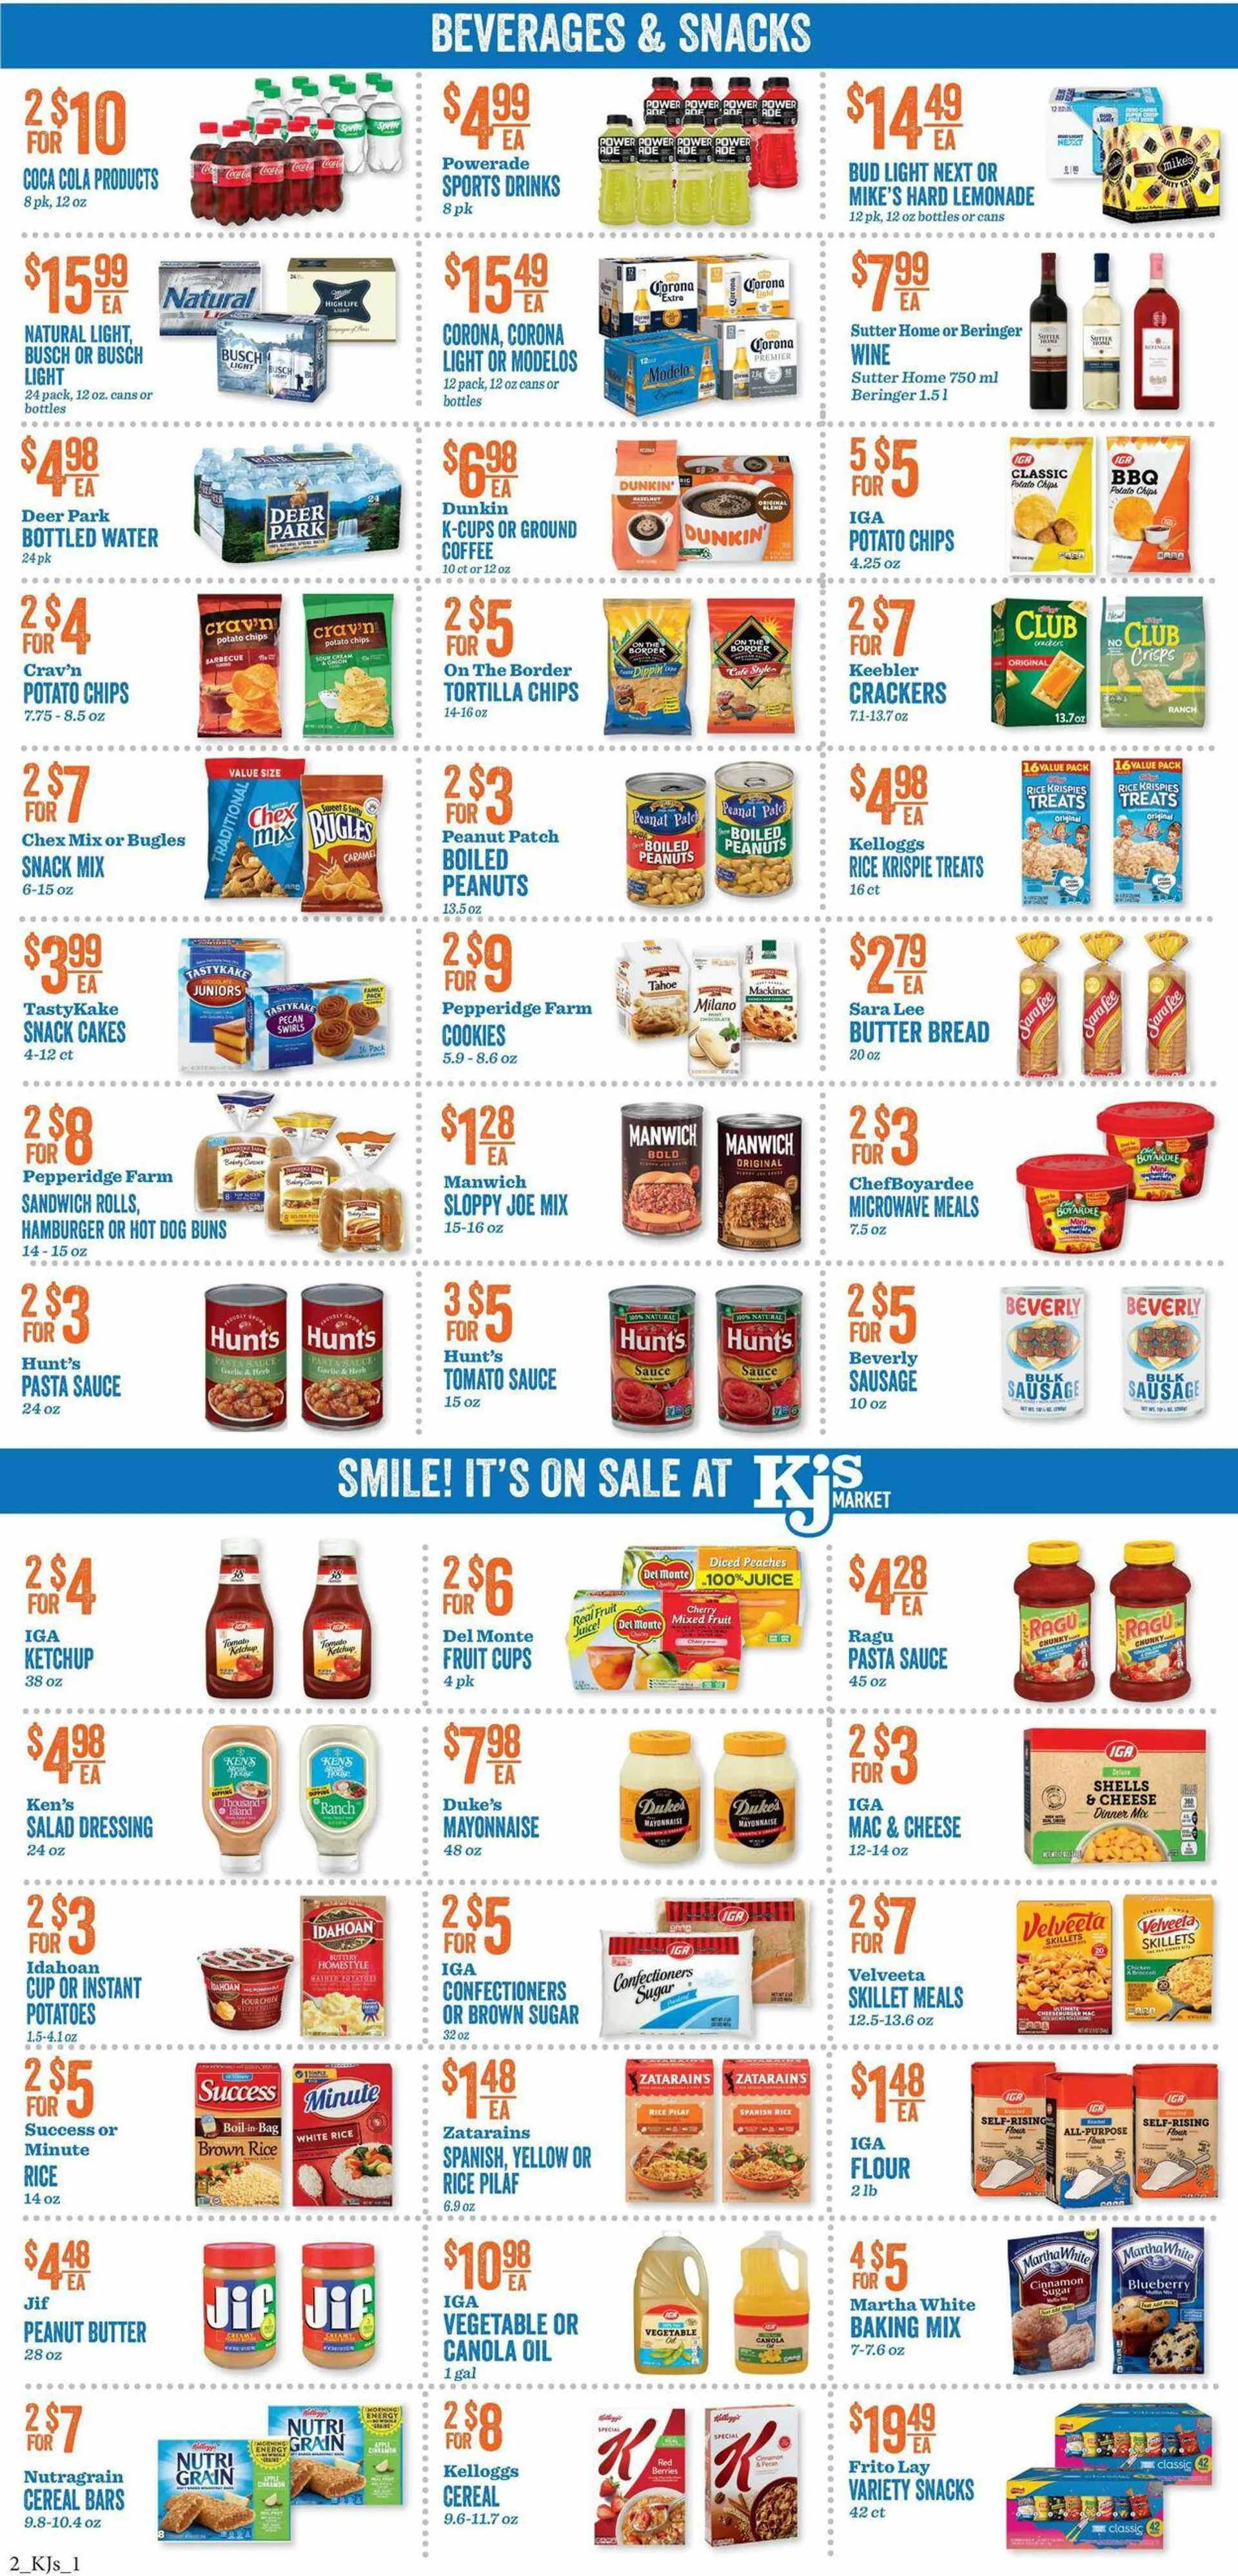 KJ´s Market Current weekly ad - 2